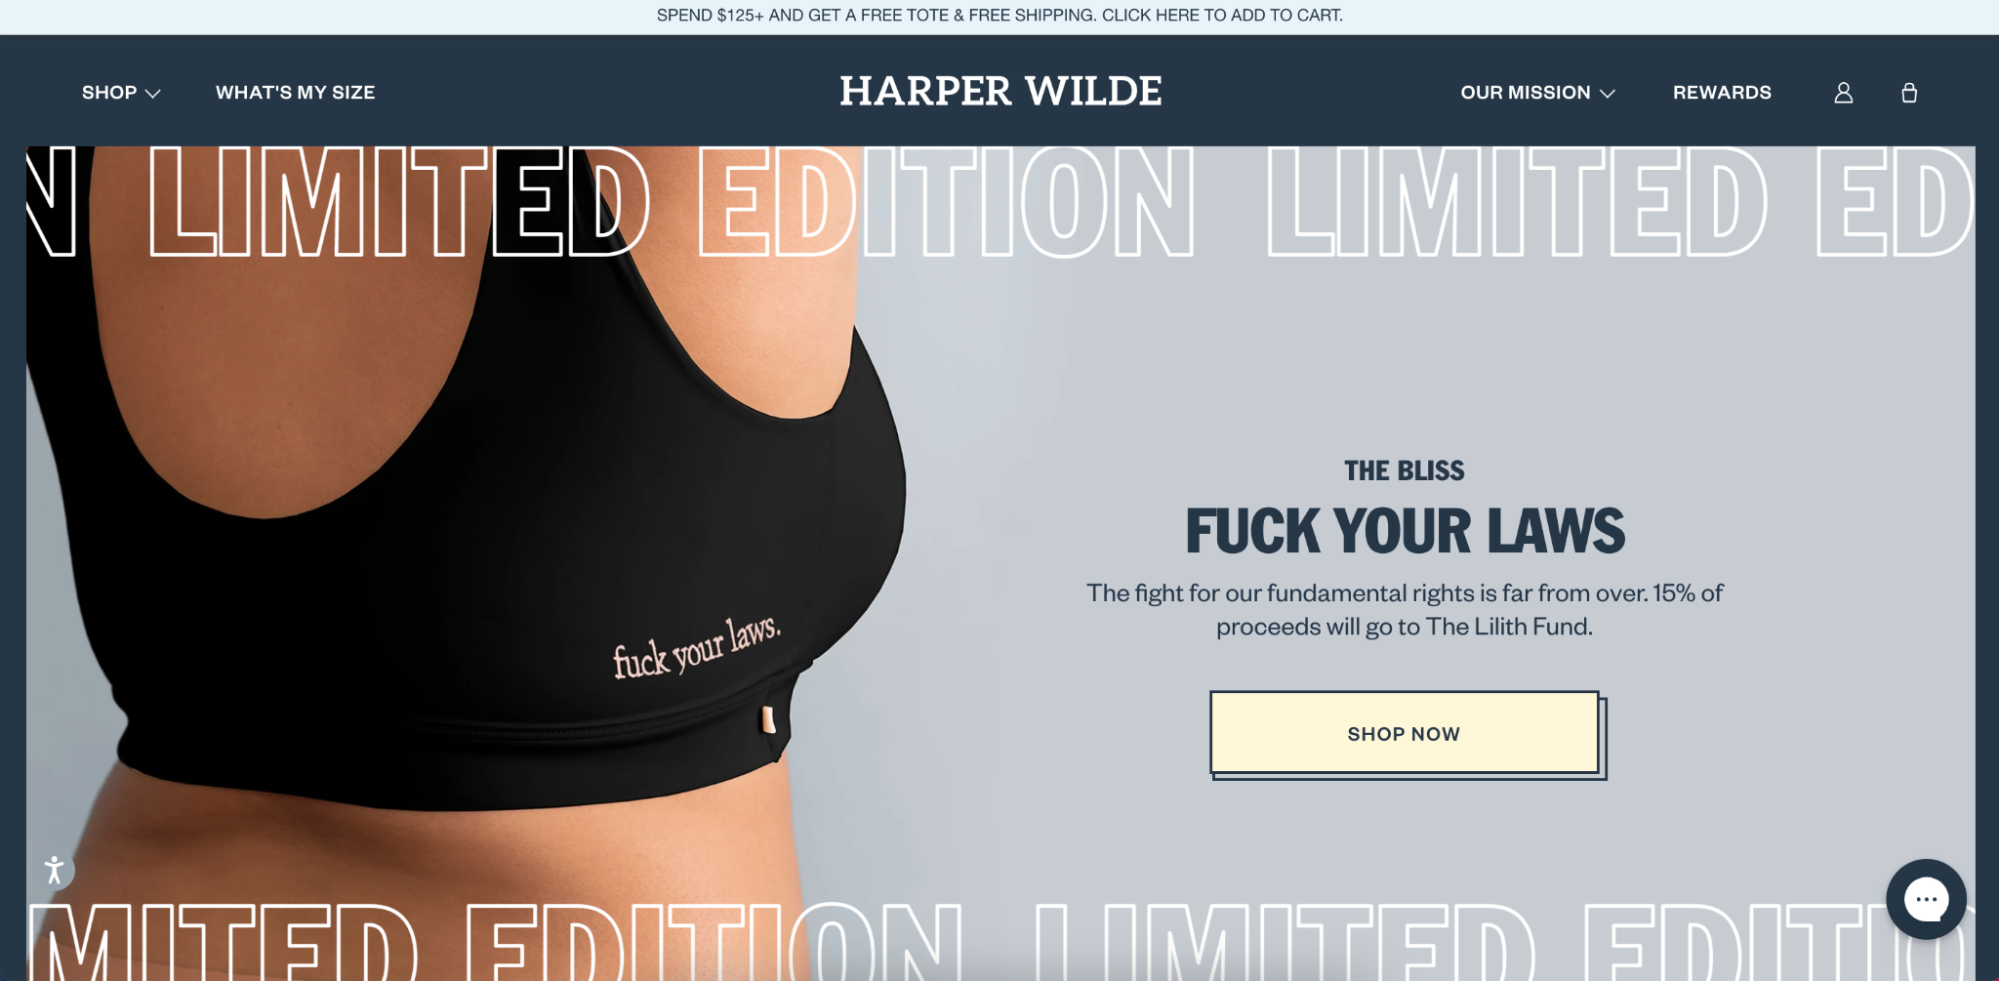 Harper Wilde's website uses bold design to match its bold brand.